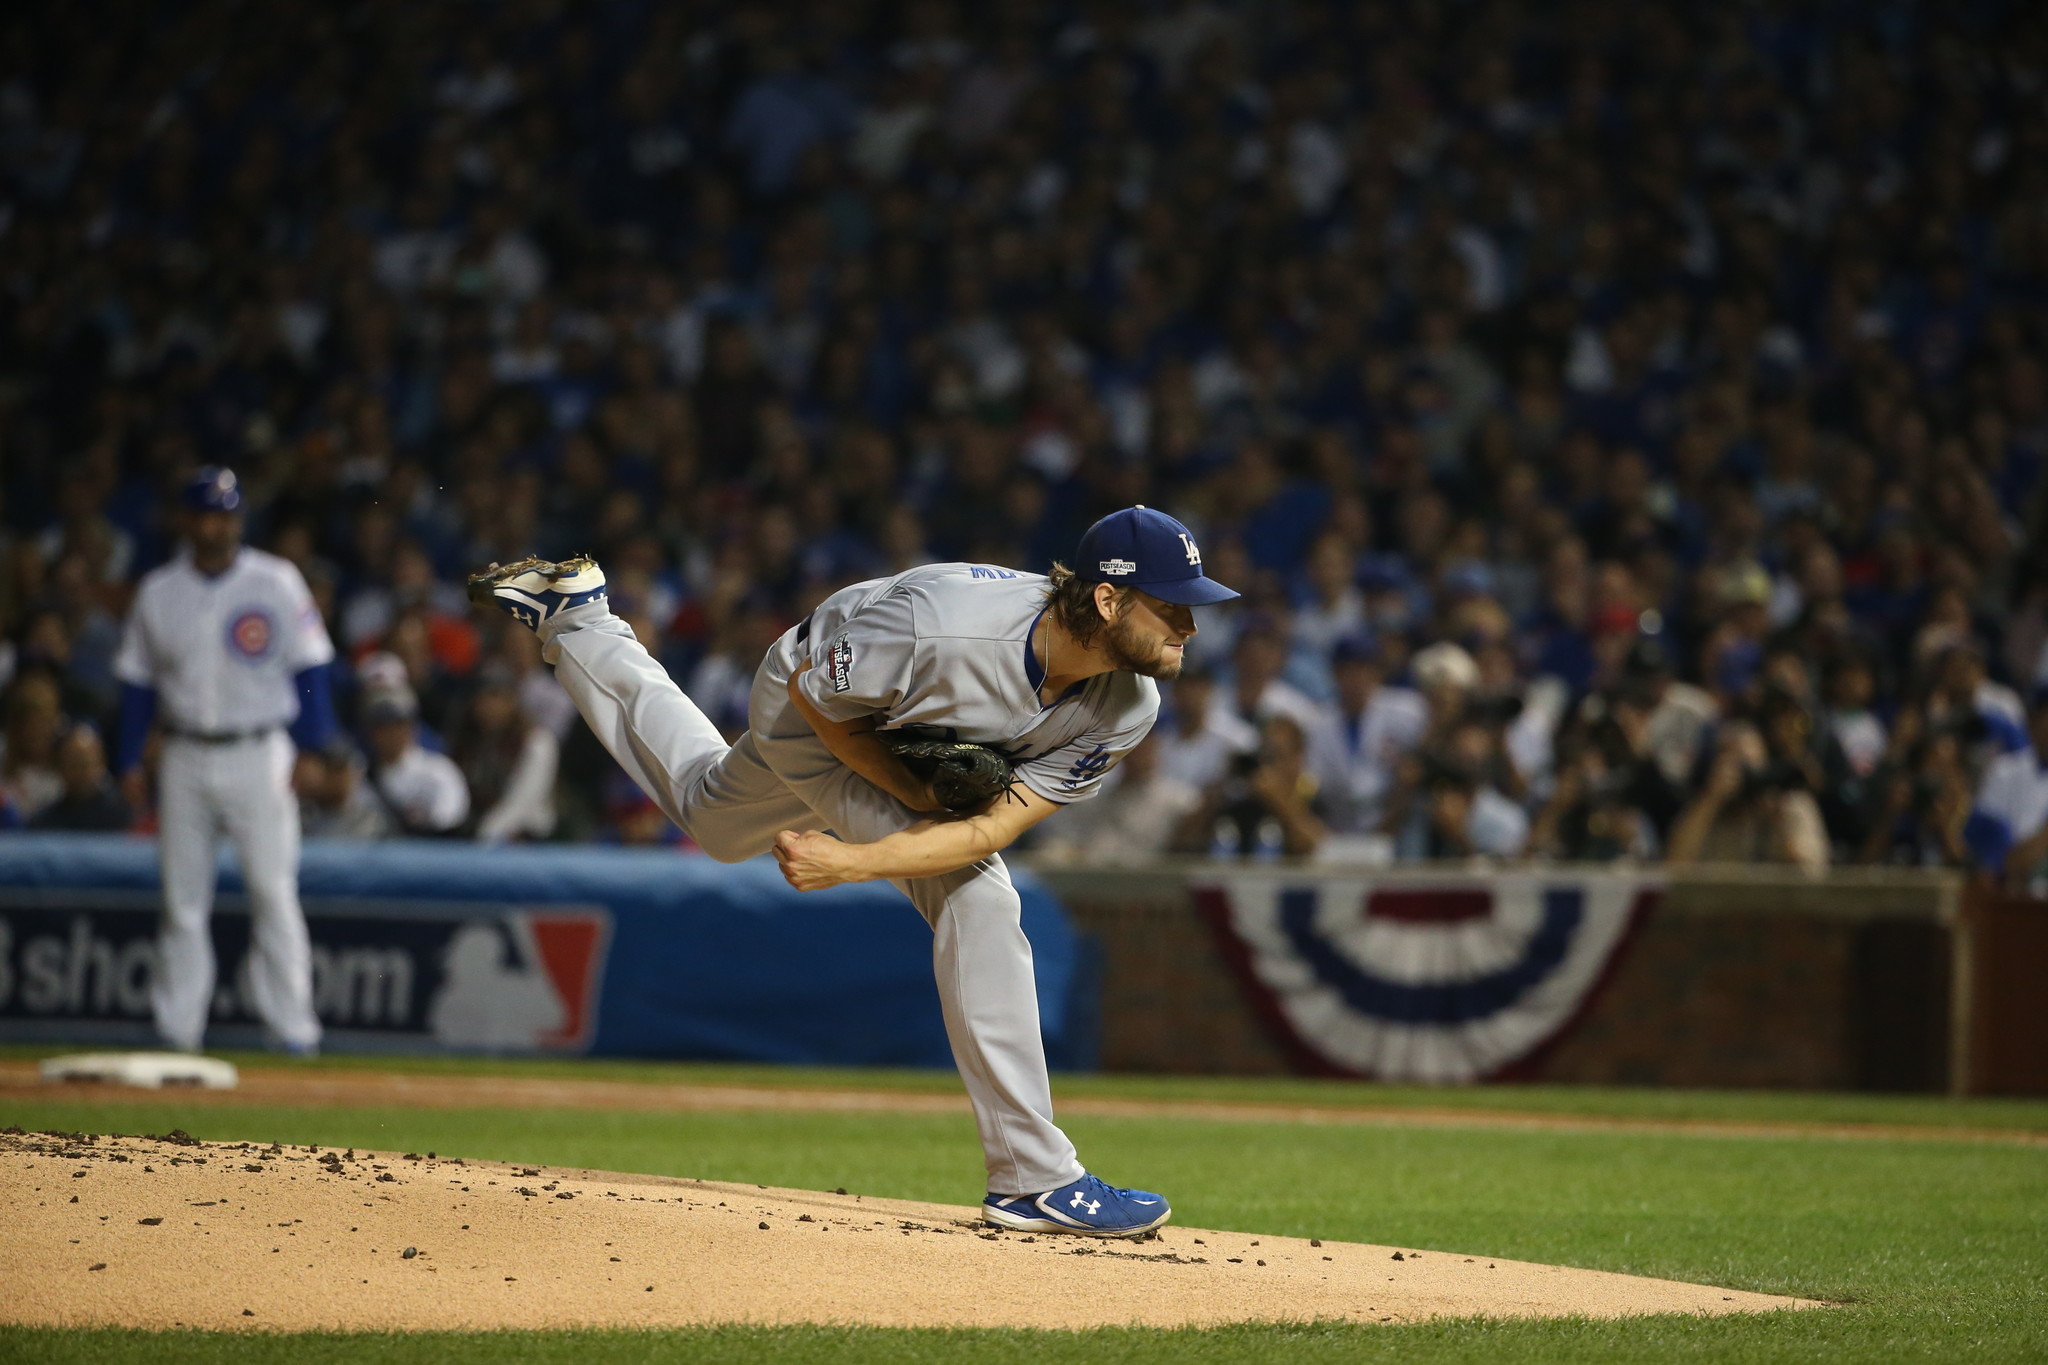 Clayton Kershaw not thinking too deeply about 'magnitude' of Game 6